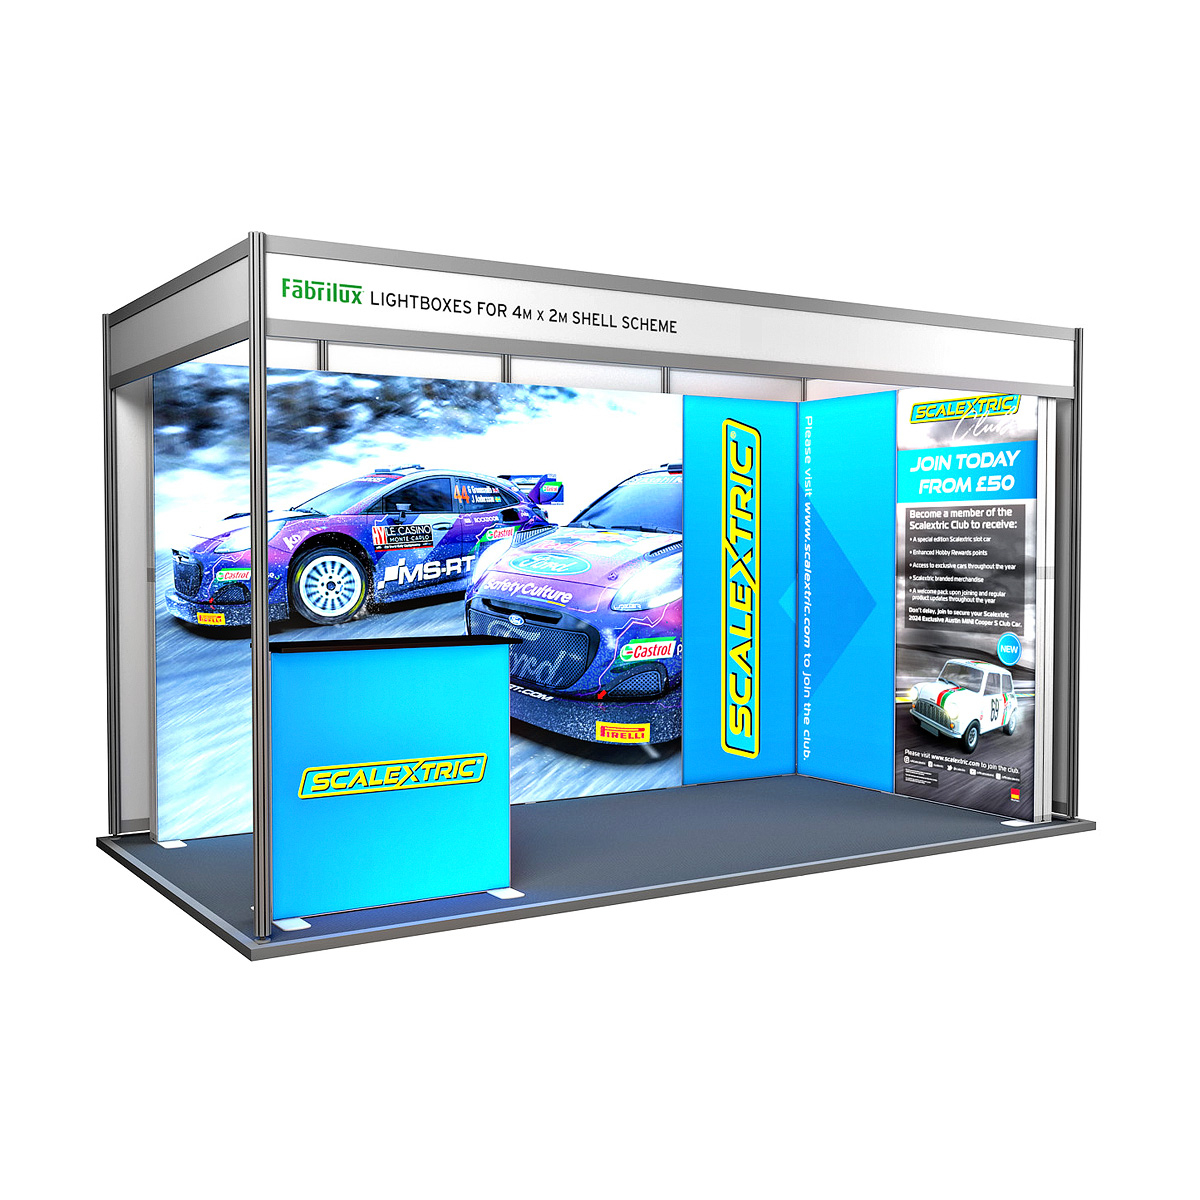 4m x 2m FABRILUX® LED Lightboxes Modular Exhibition Stand Shell Scheme